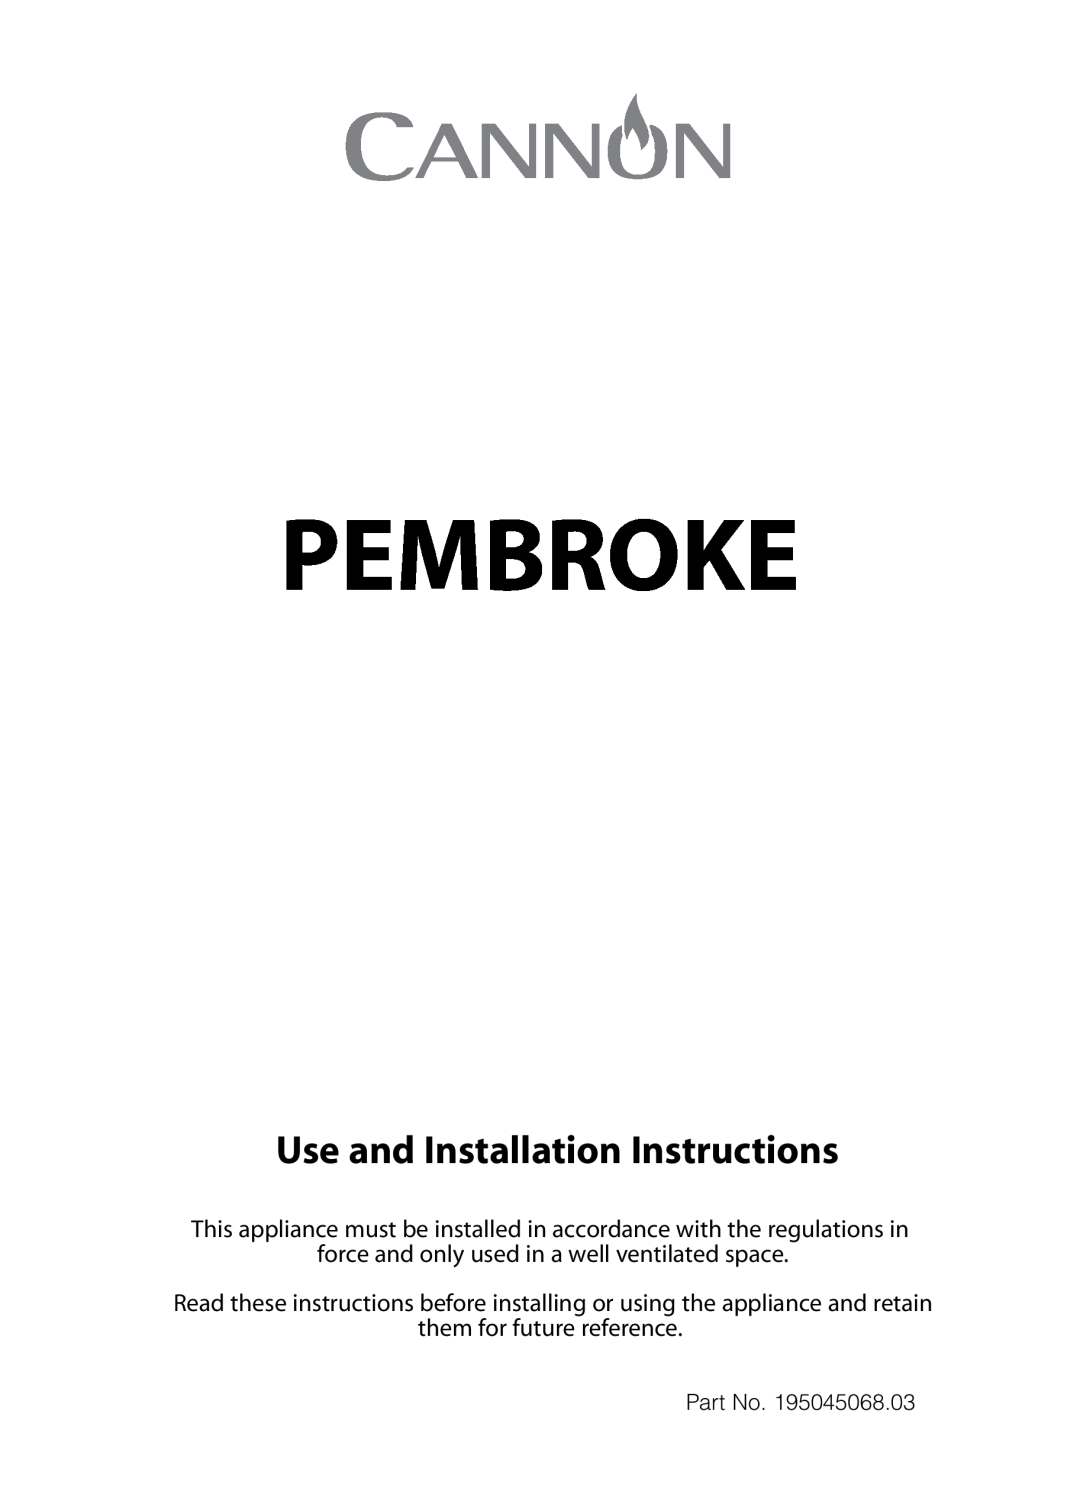 Cannon 10692G, 10698G, 10695G installation instructions Use and Installation Instructions, Pembroke 